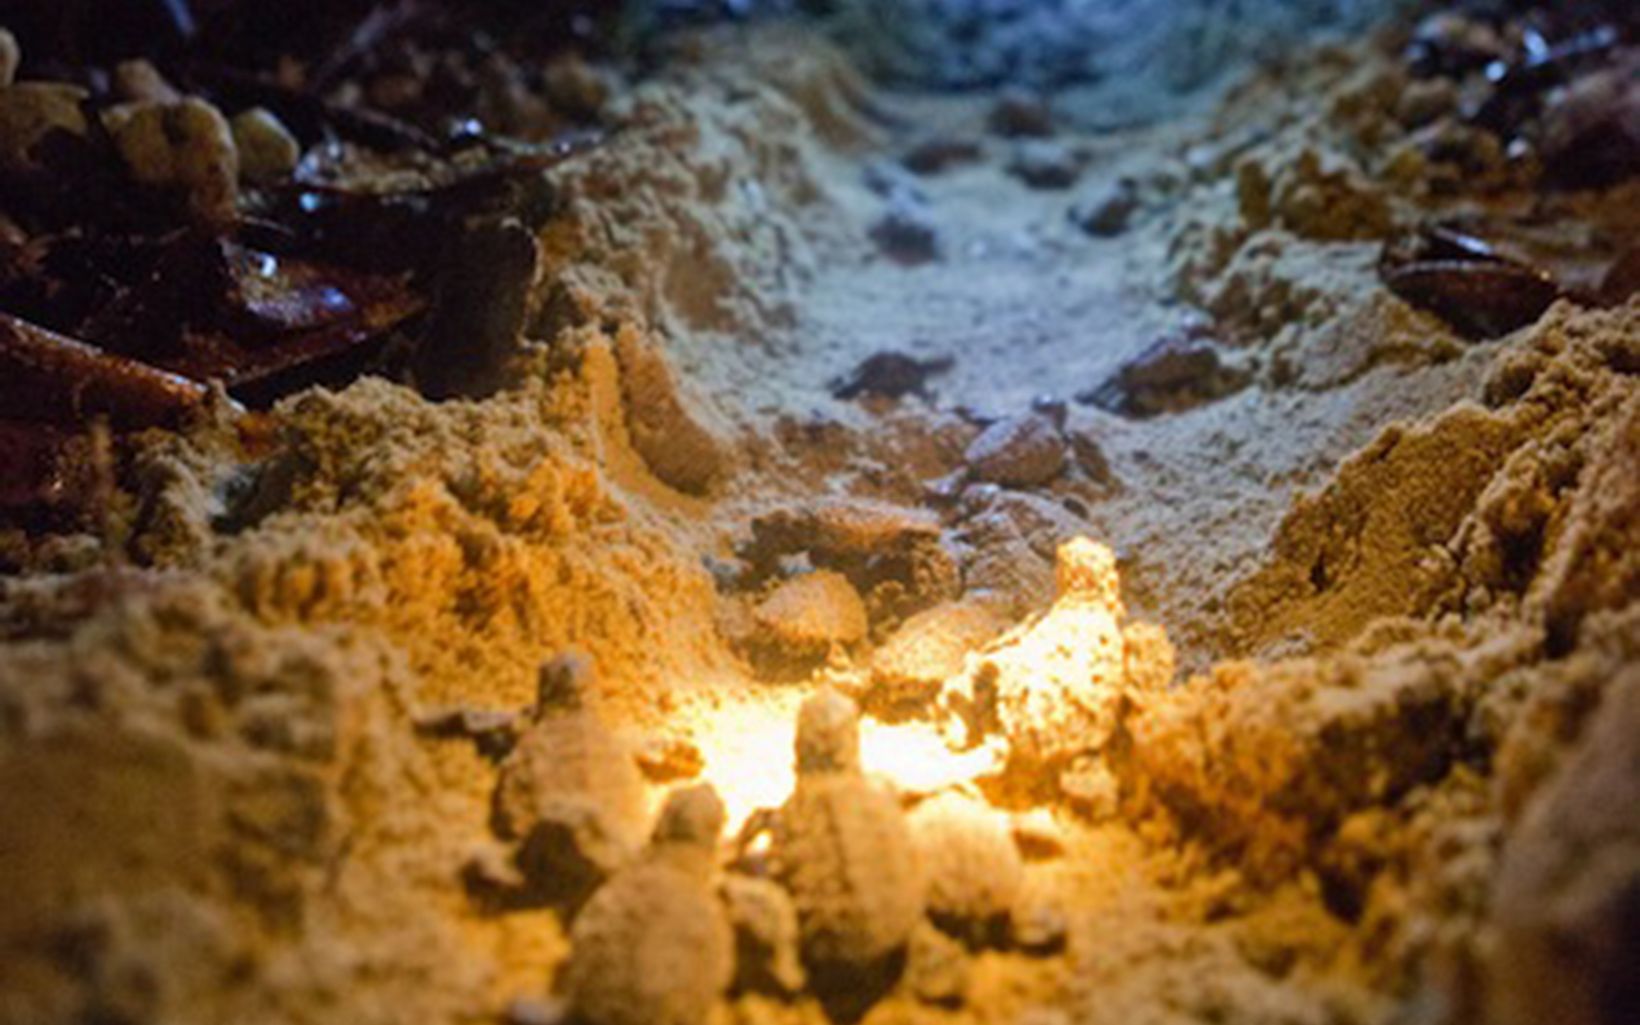 July 2012 TNC Annual report assignment in the Solomon Islands. Images from the Arnavon Islands of sea turtles nesting and hatchlings being released and guided to sea by flashlight.